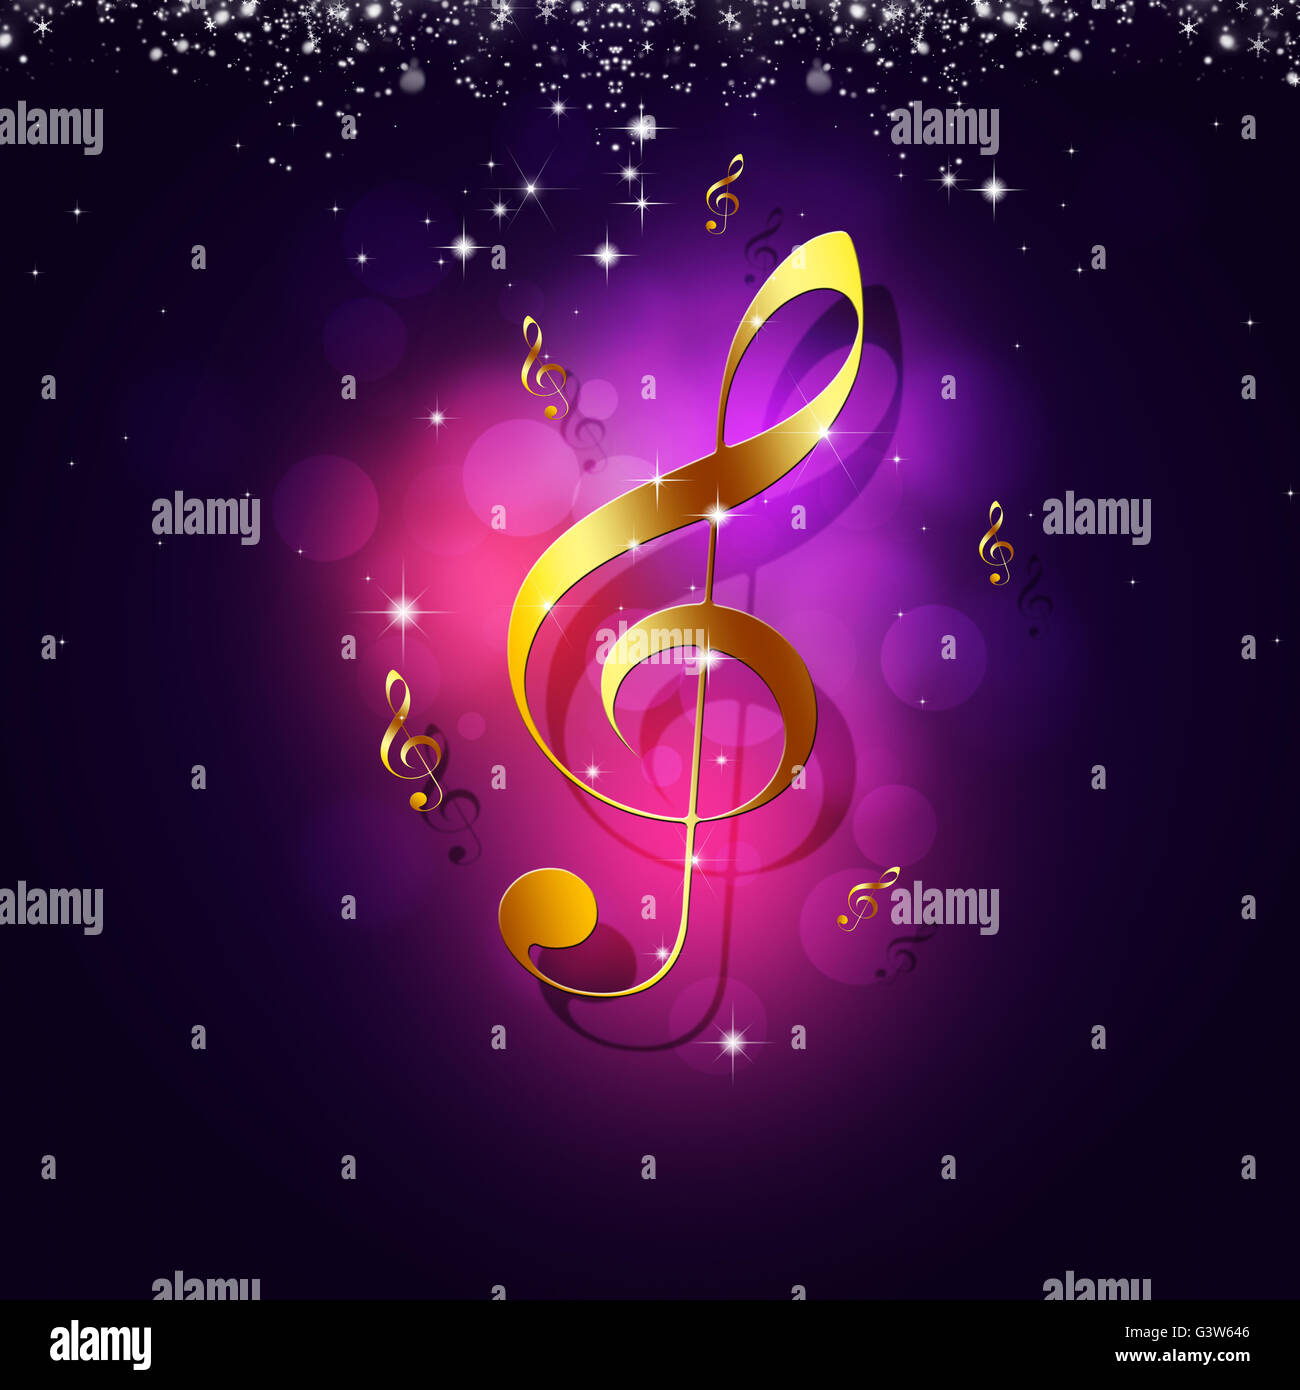 abstract golden music notes on red background Stock Photo